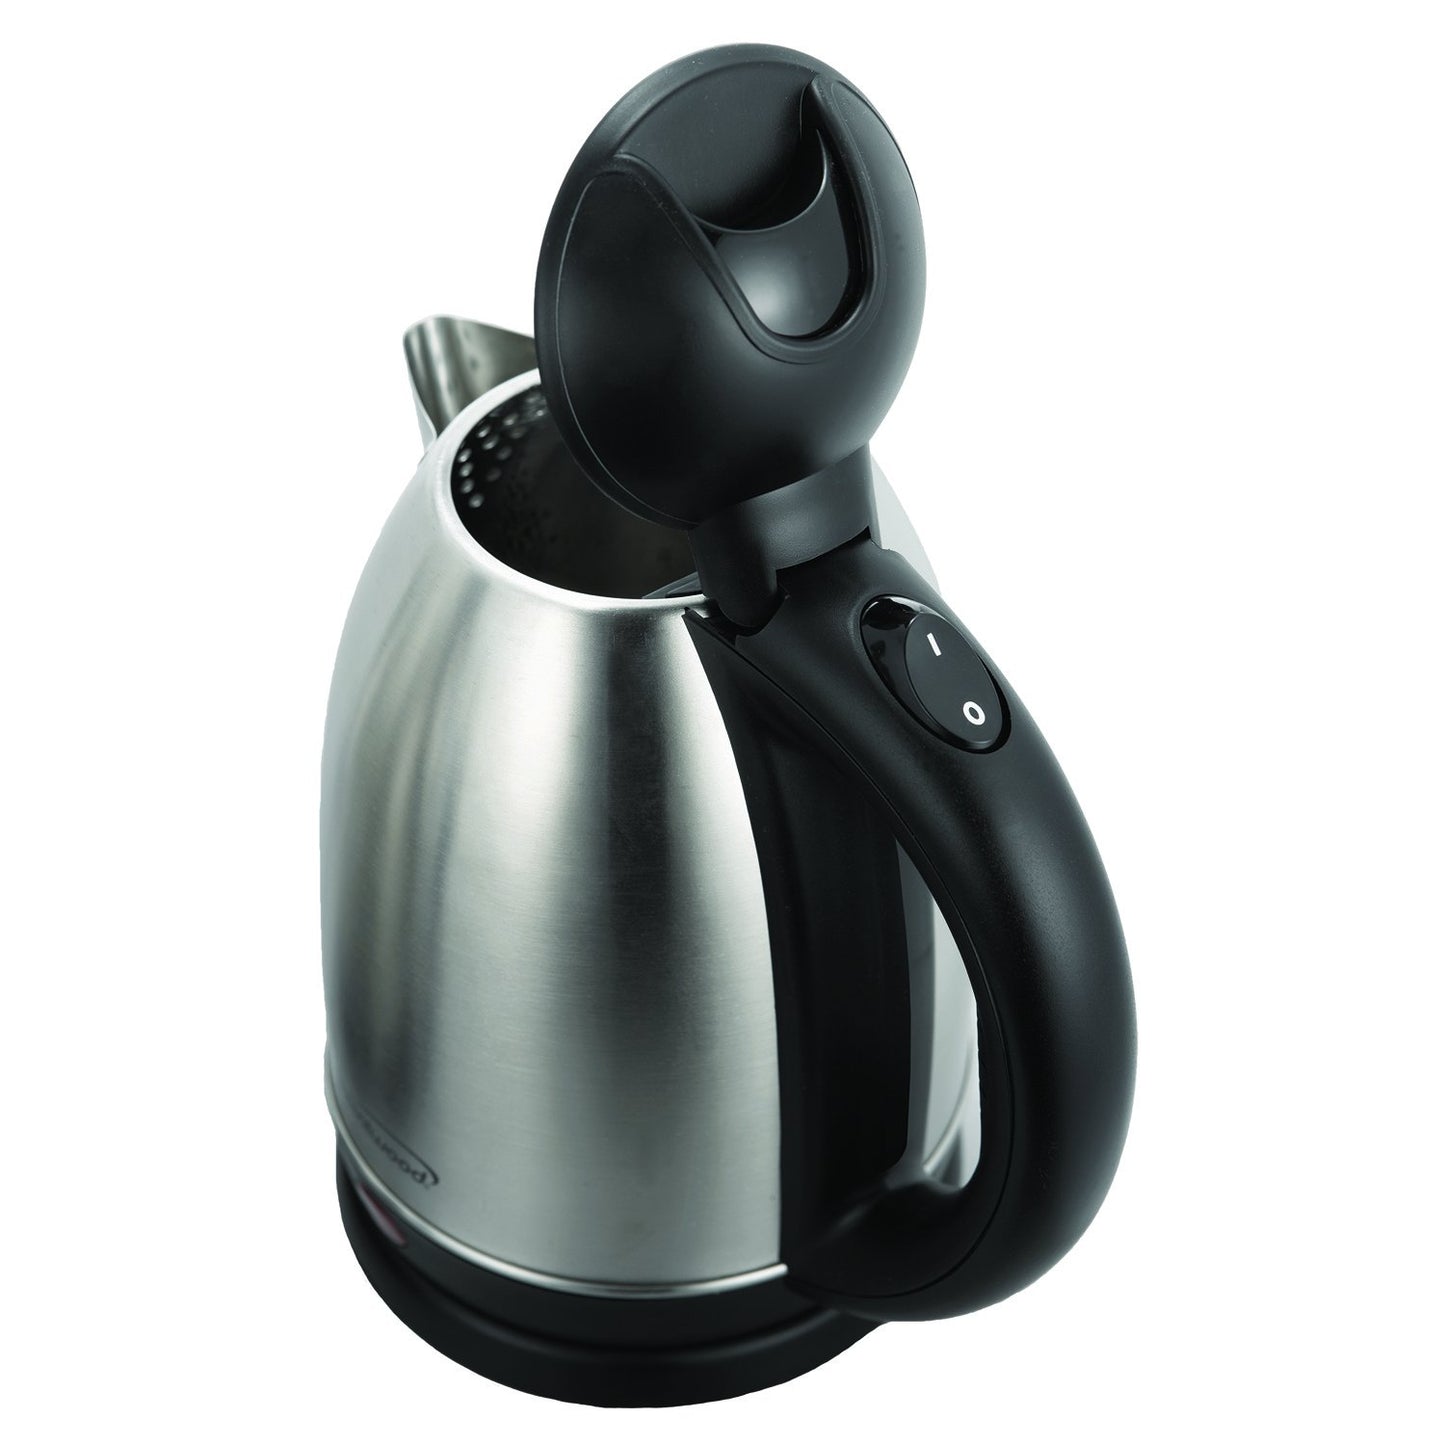 Brentwood Appl. KT-1780 1.5L Stainless Steel Cordless Electric Kettle